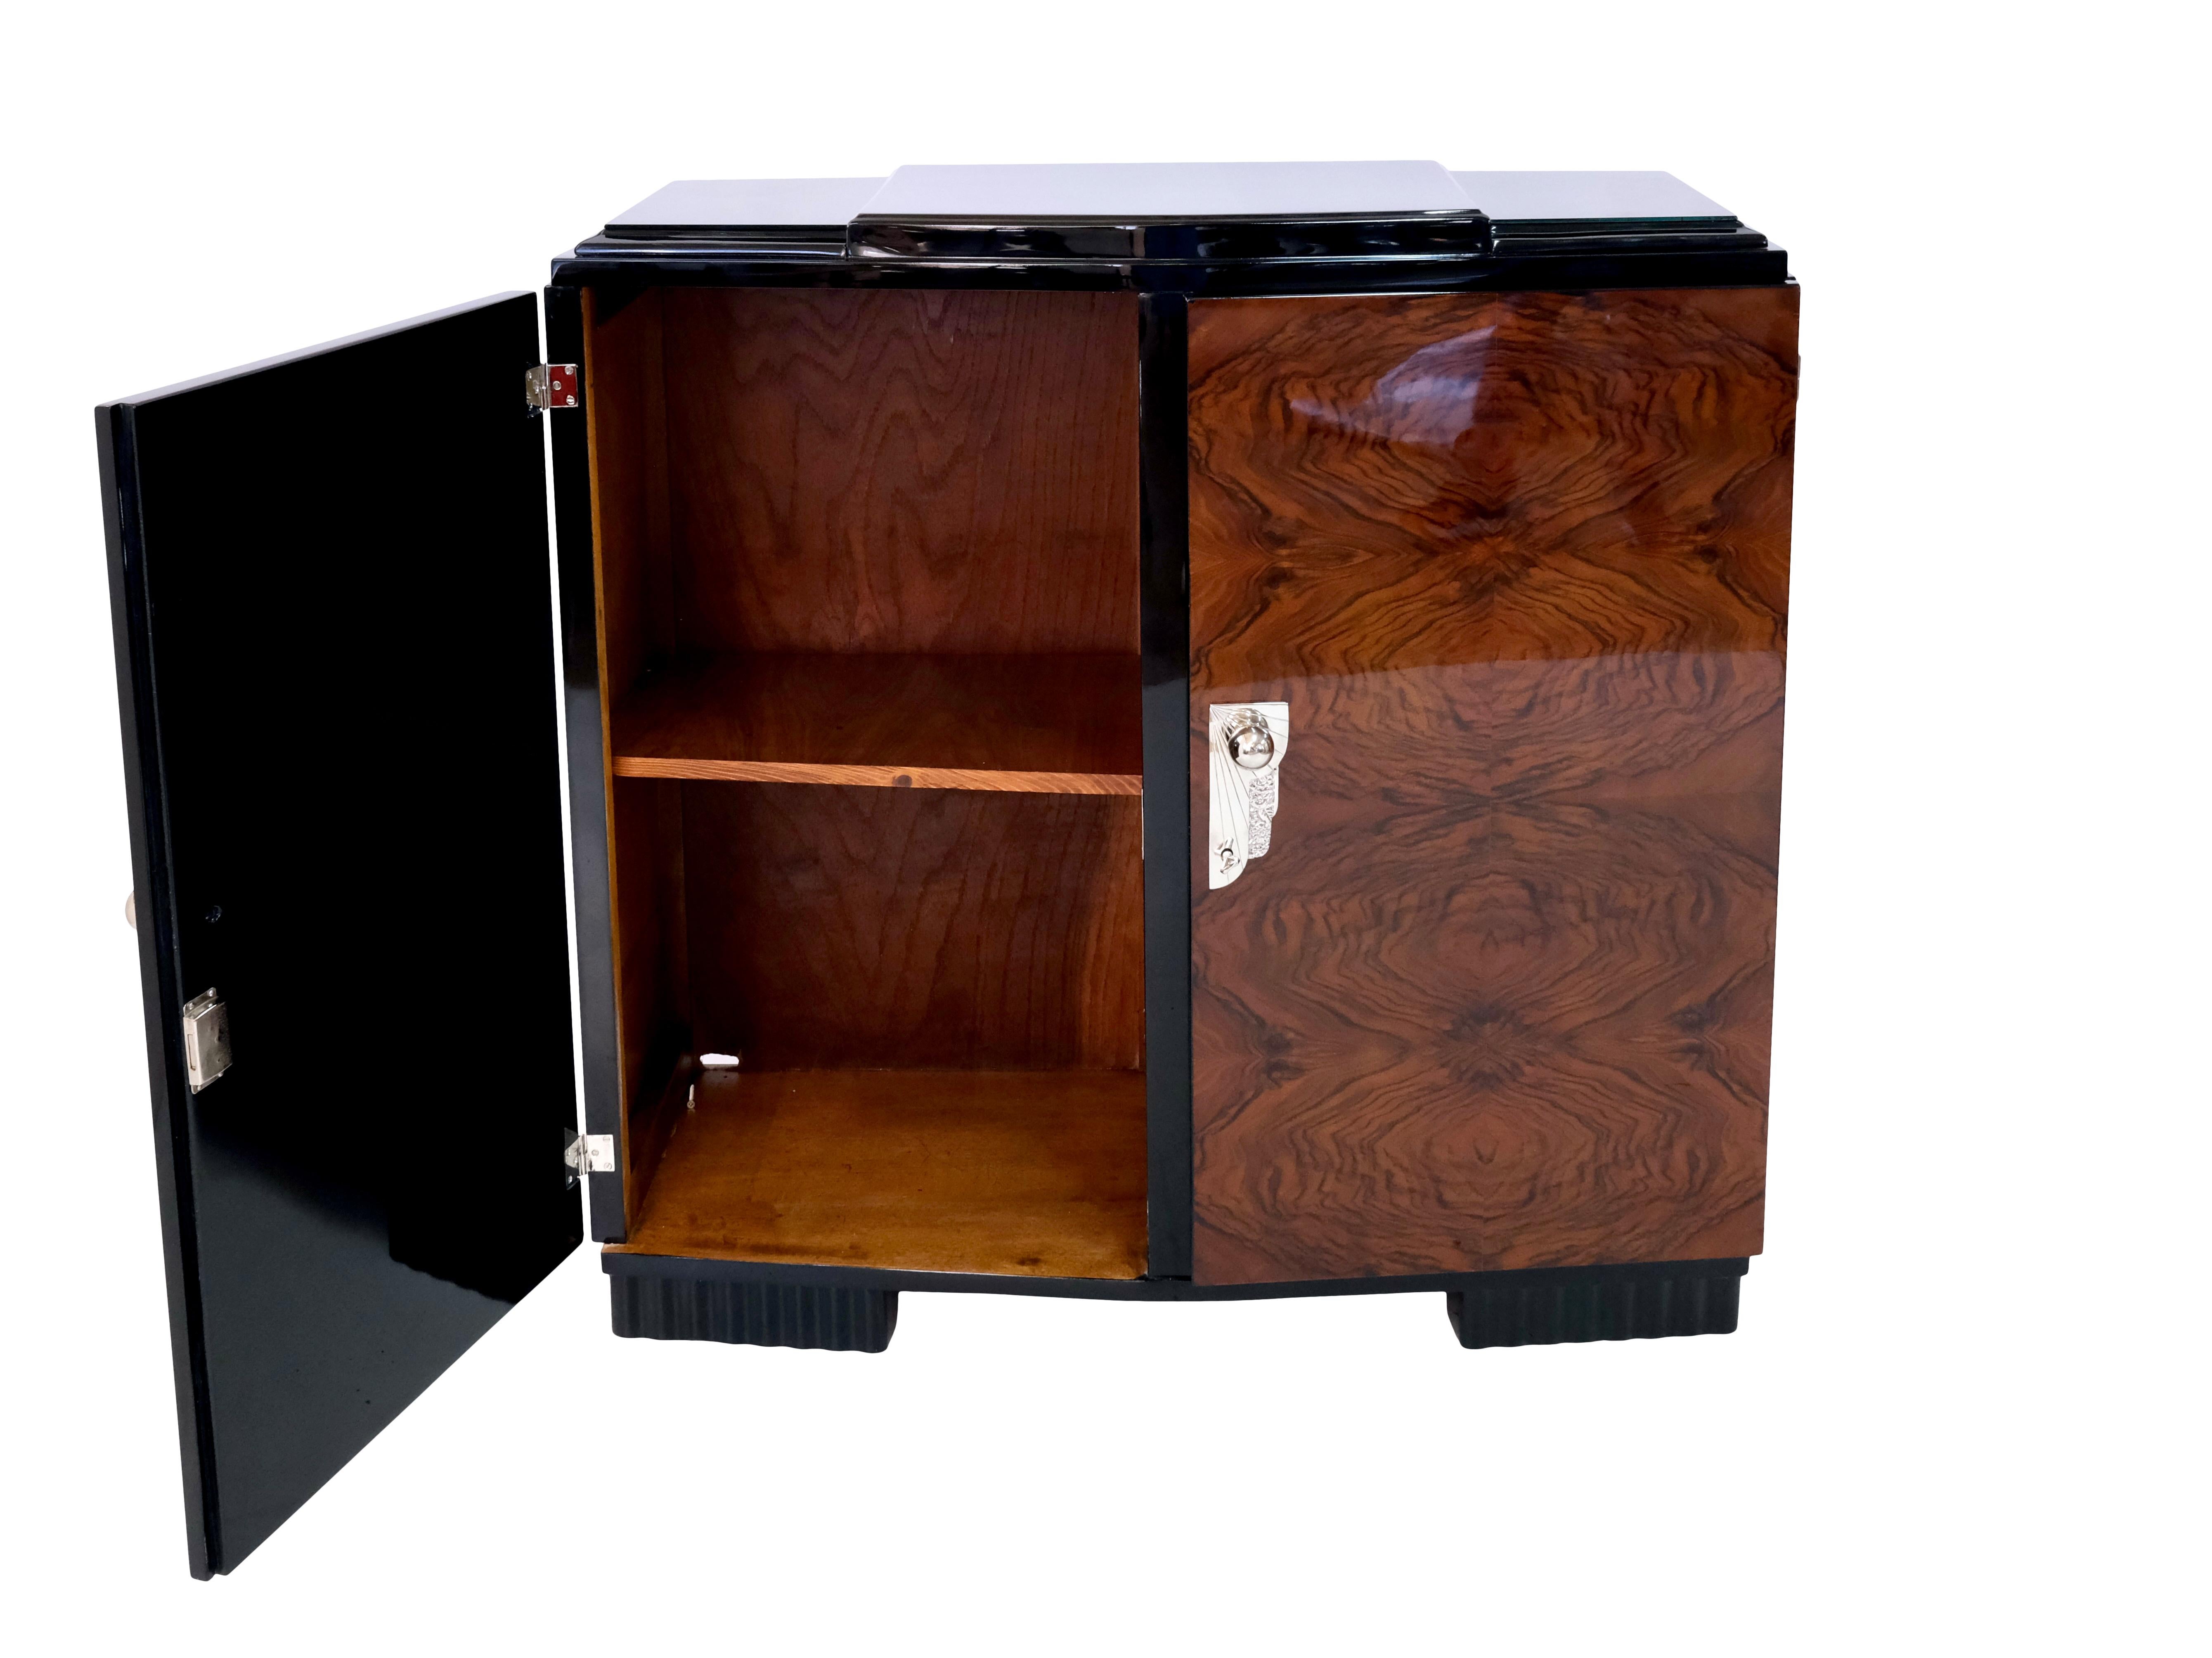 Blackened French, 1930s Art Deco Highboard with Nutwood Veneer and Black Lacquer Body